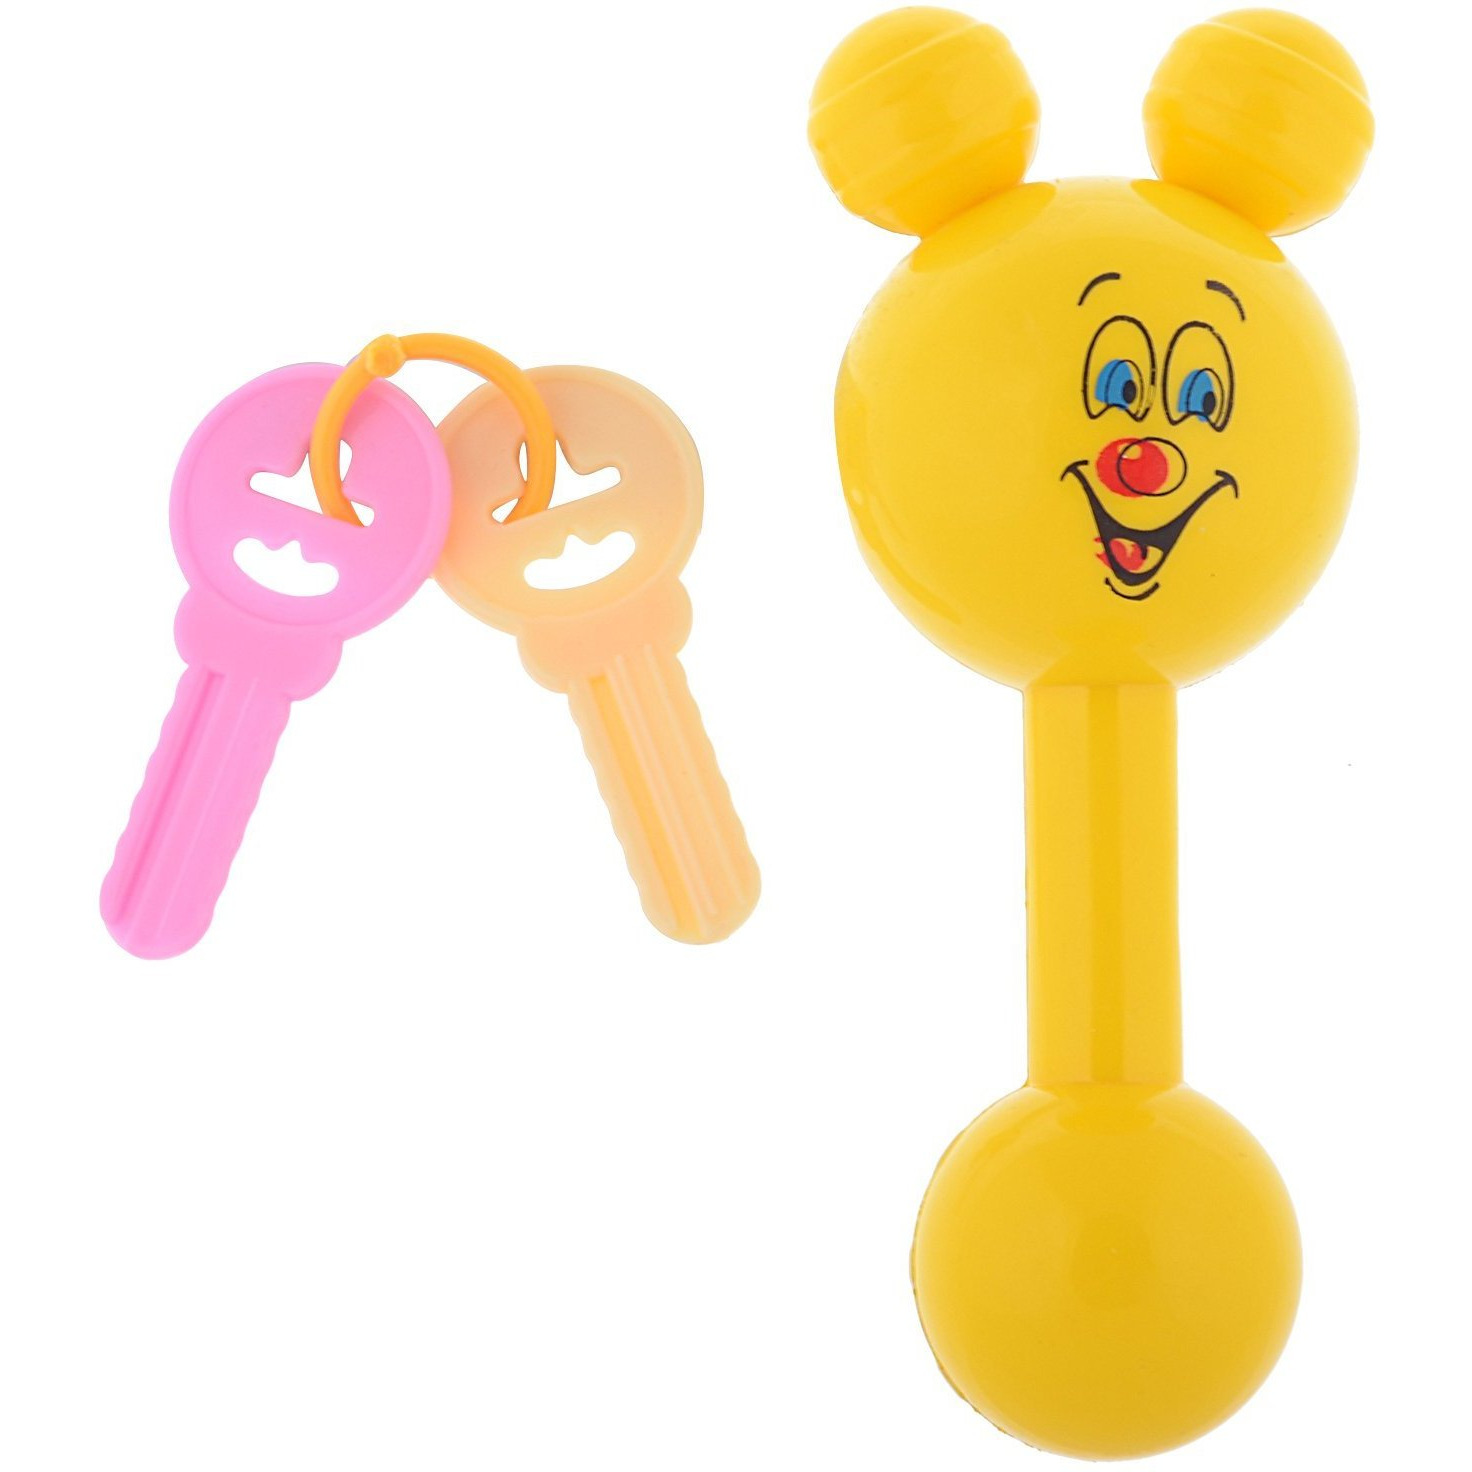 Auto Flow Rattle Toy - Jinny Toy - BT27 Yellow